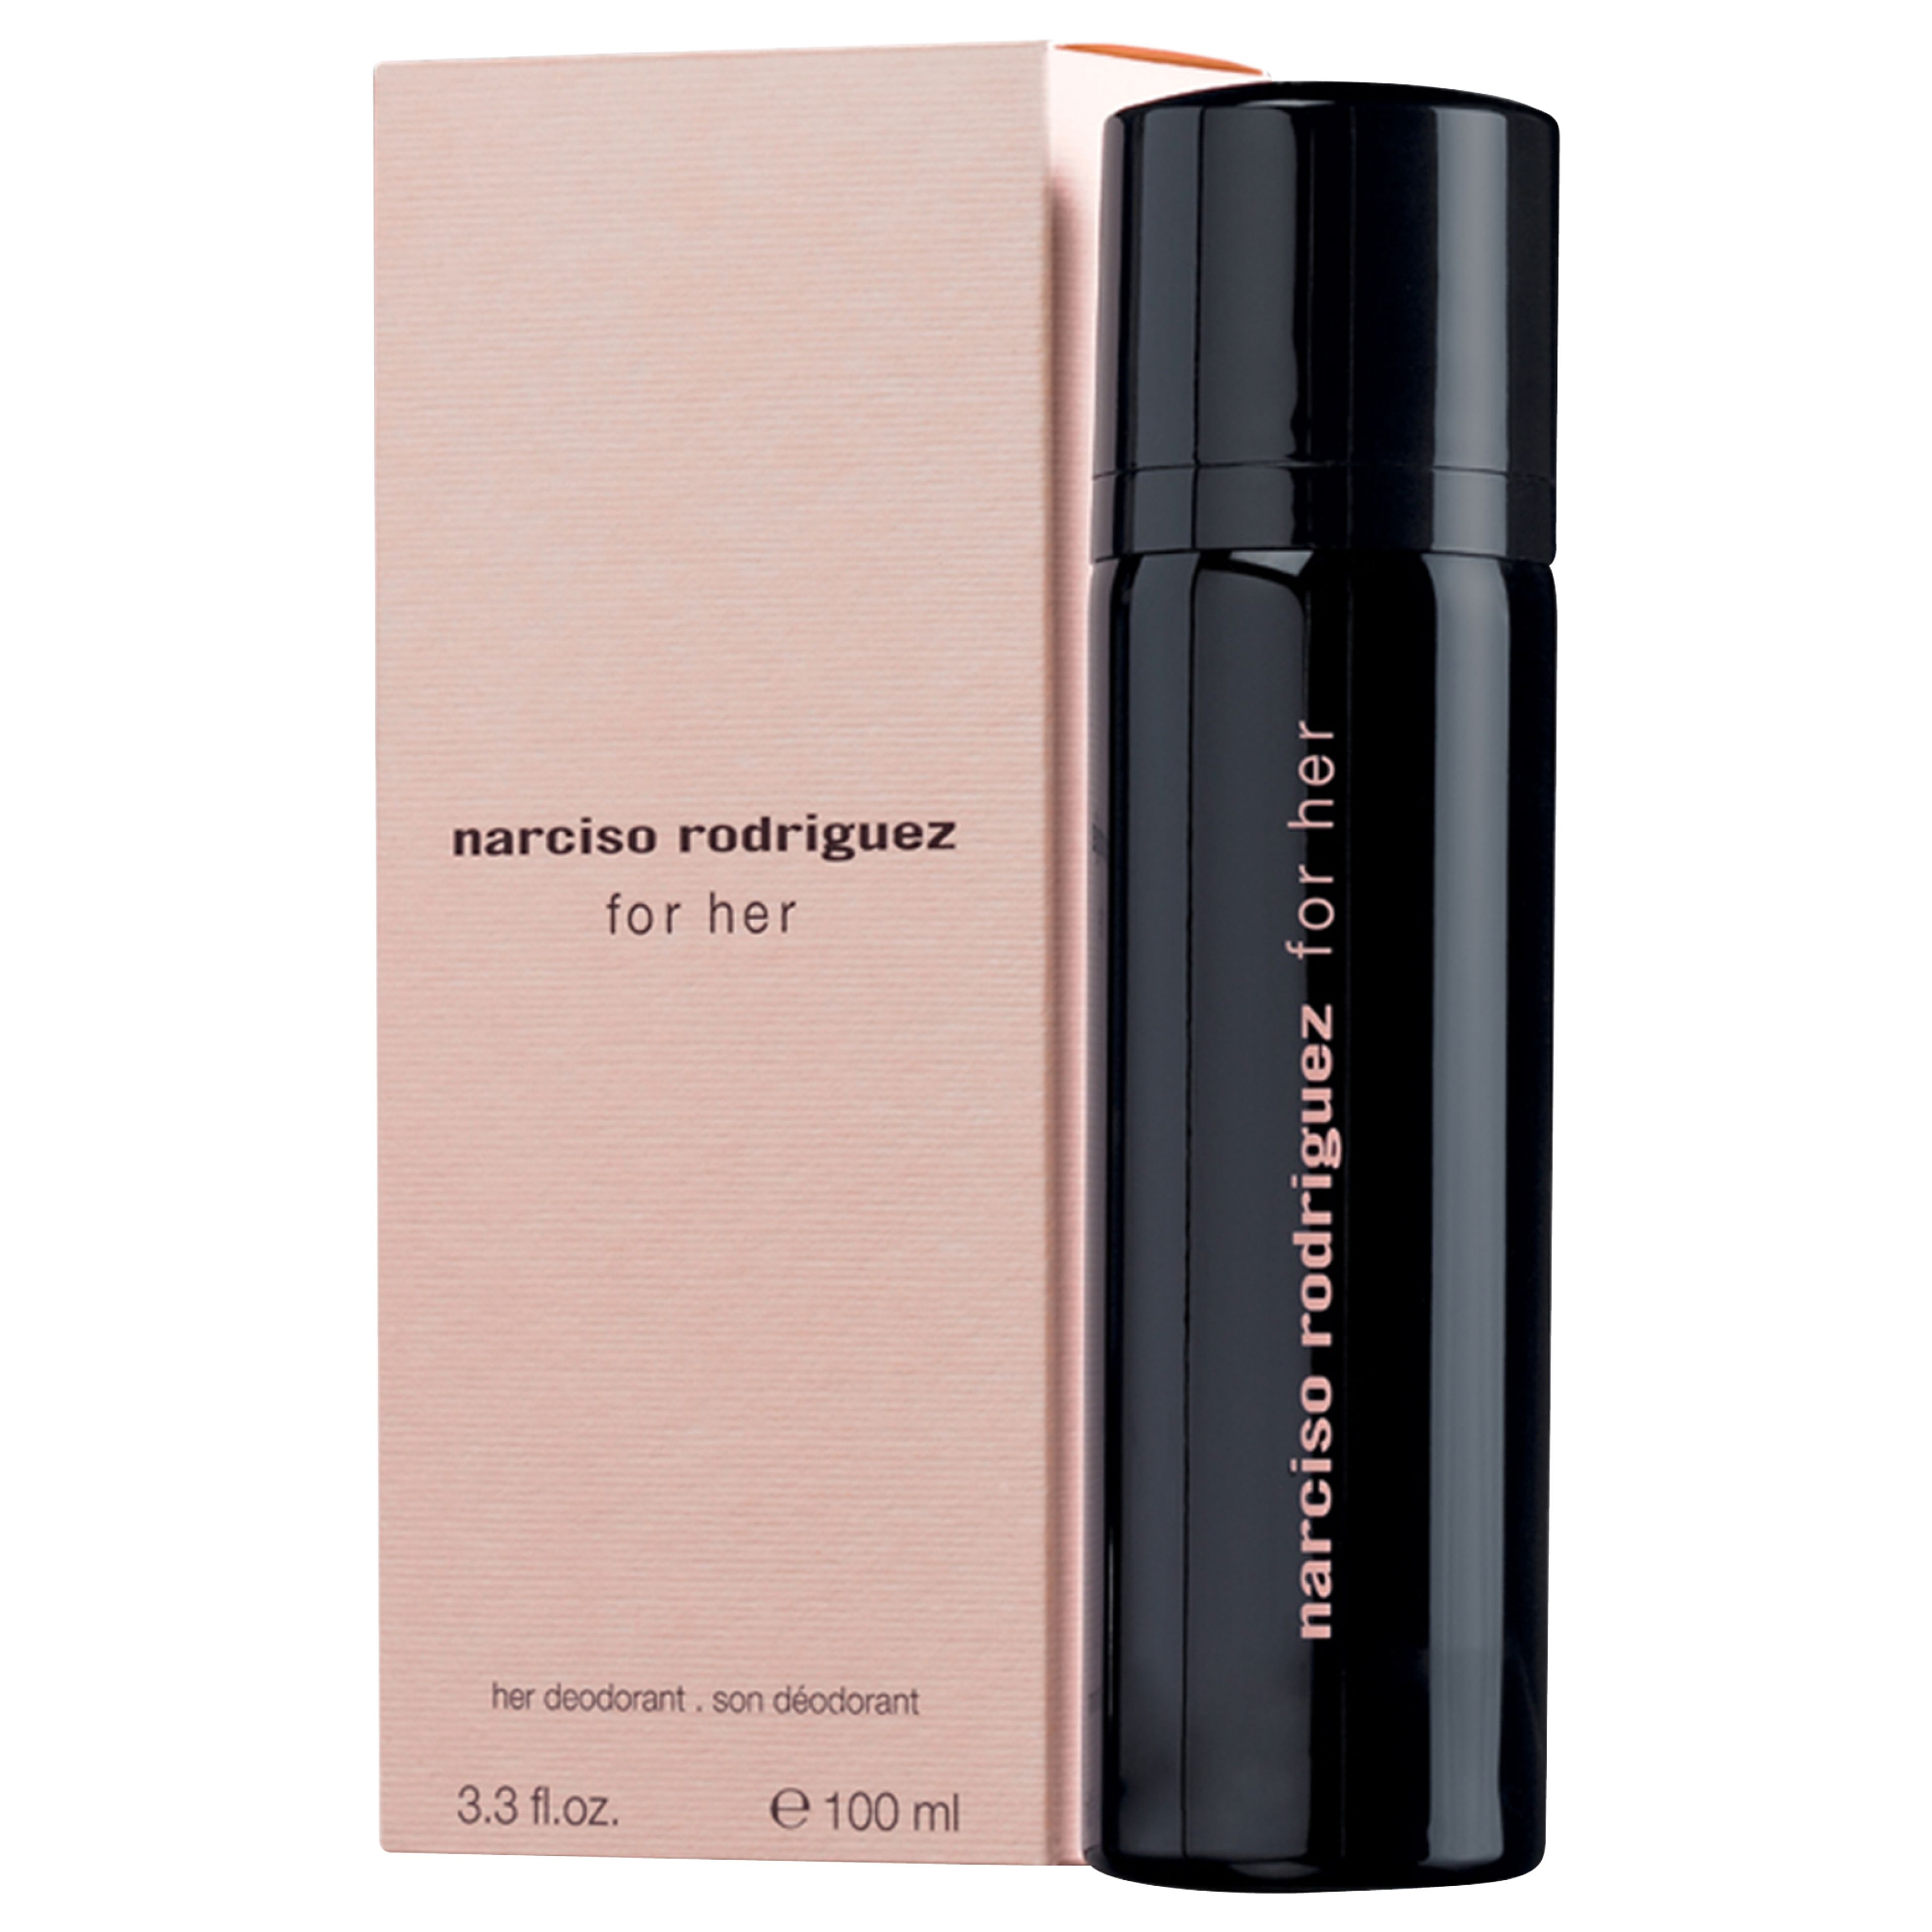 For Her Deodorant 100ml Narciso Rodriguez 2